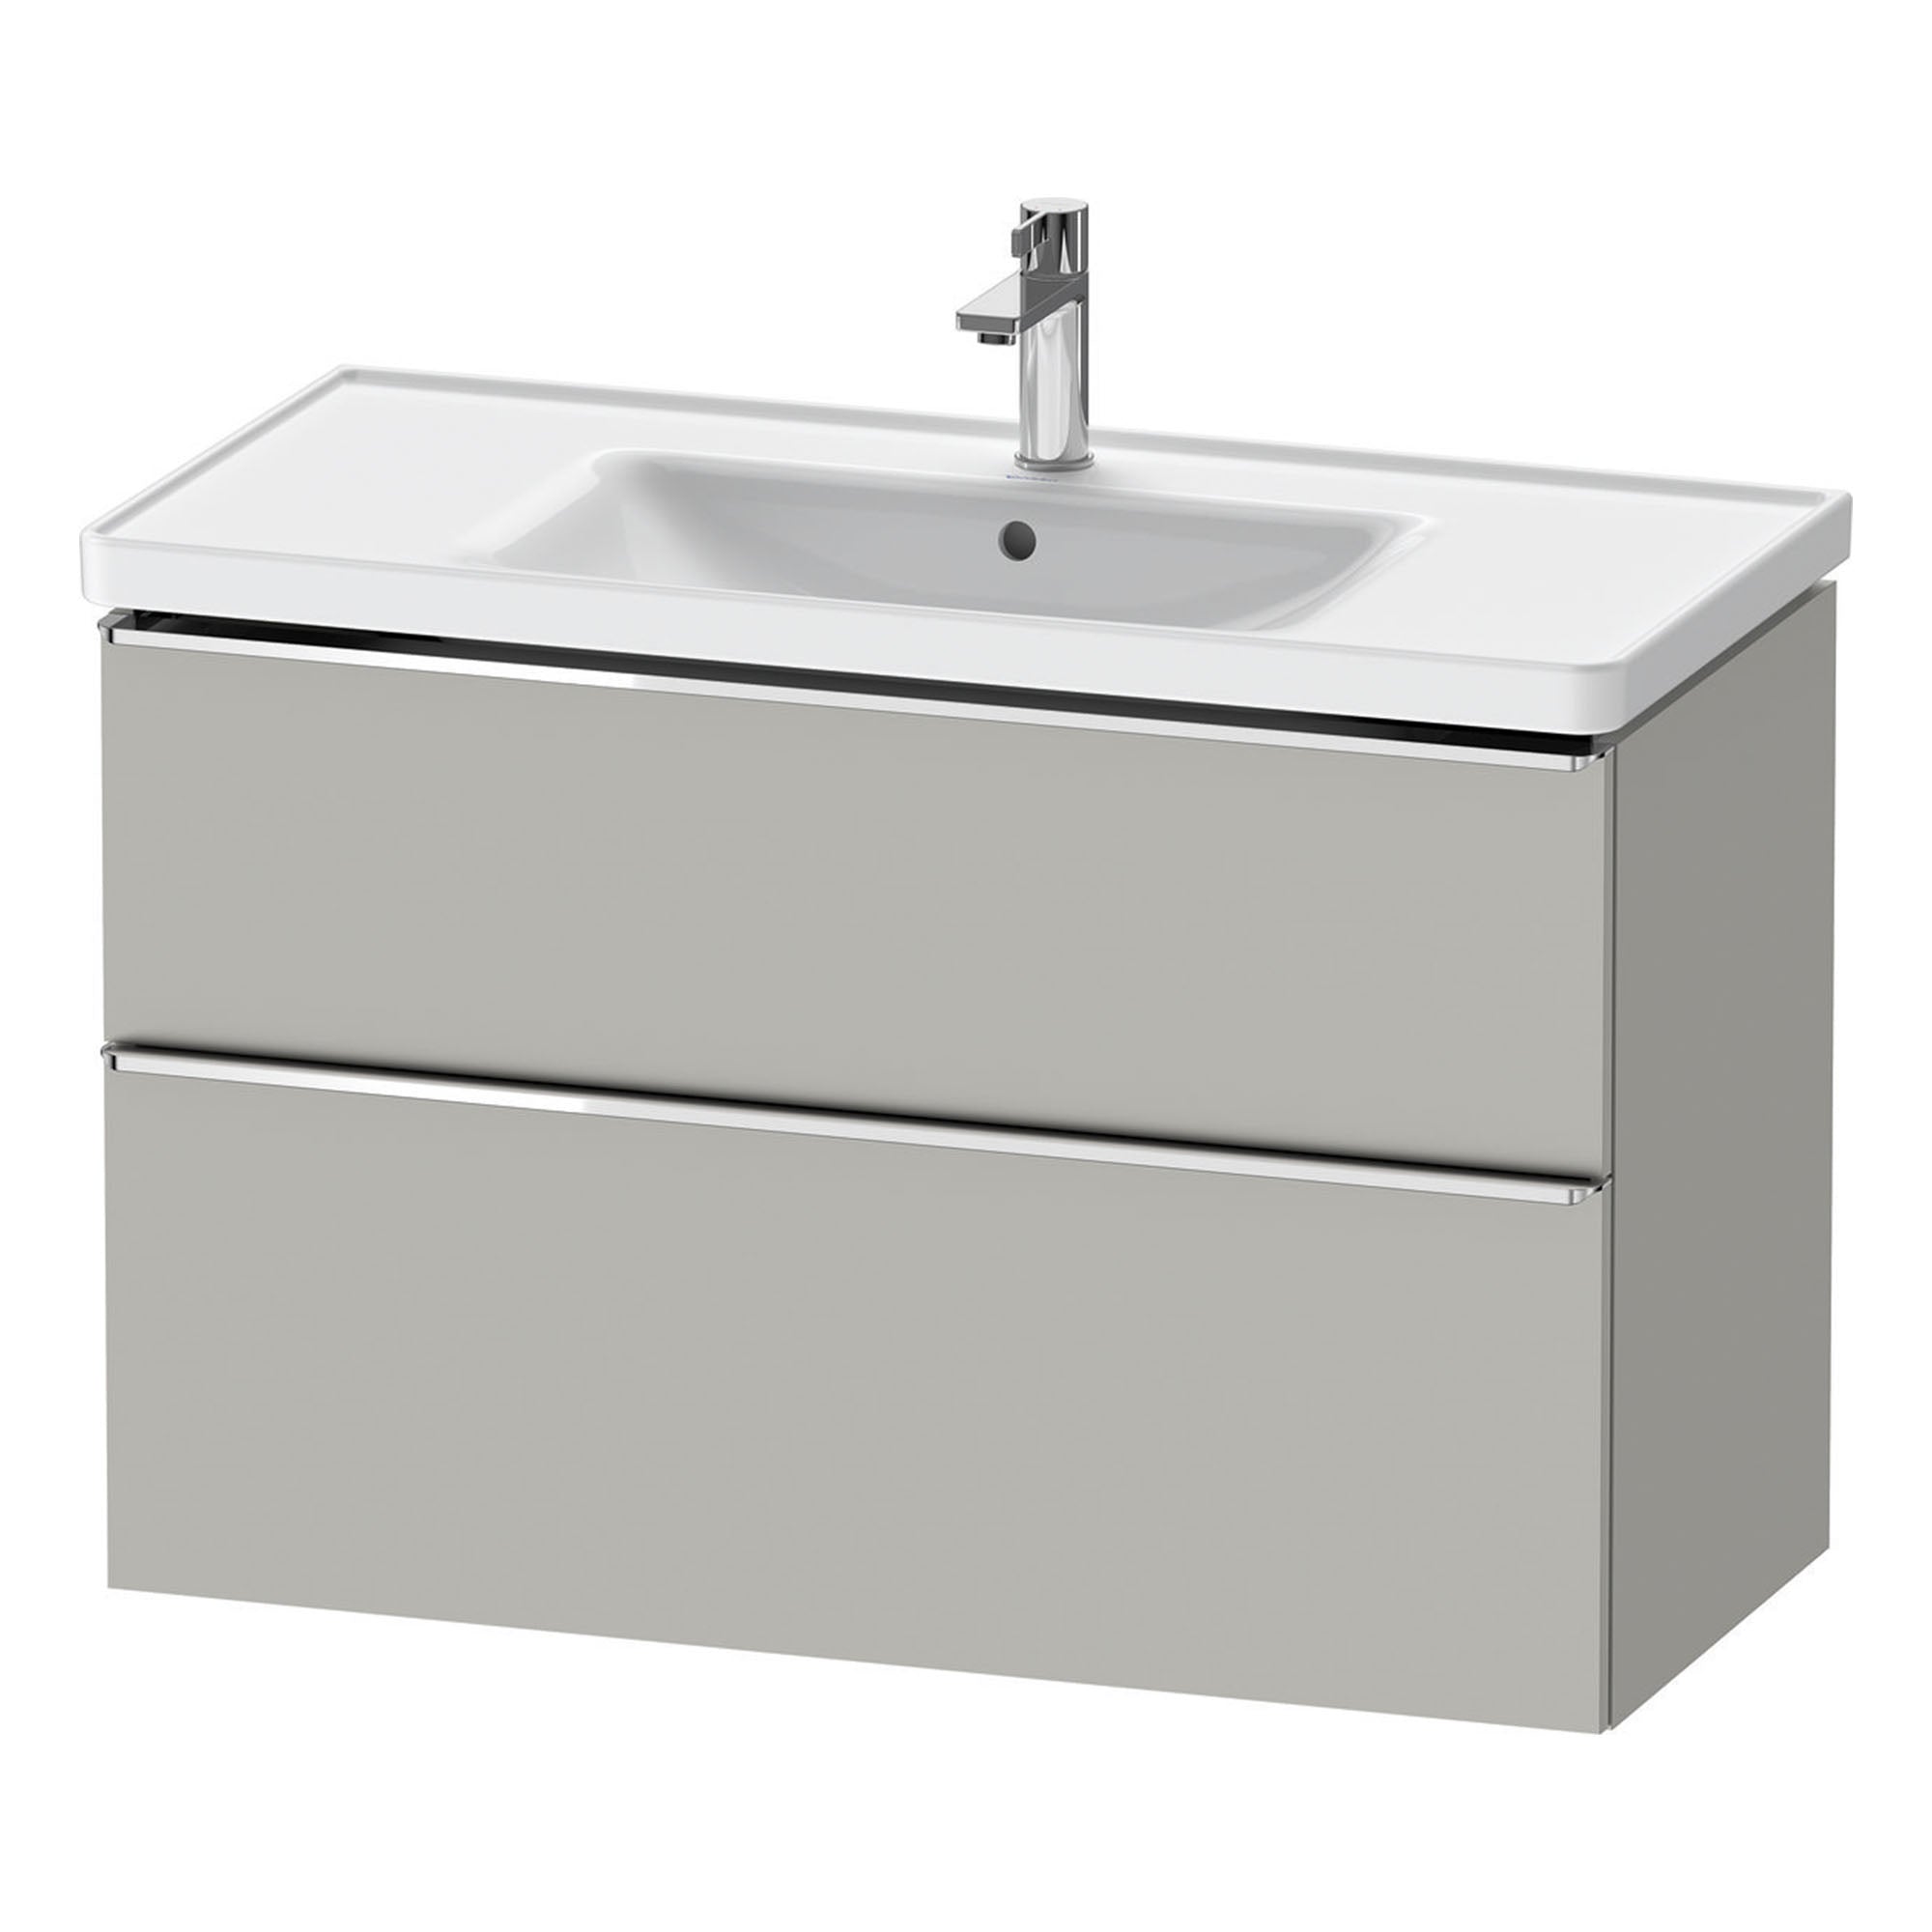 duravit d-neo 1000mm wall mounted vanity unit with d-neo basin concrete grey chrome handles